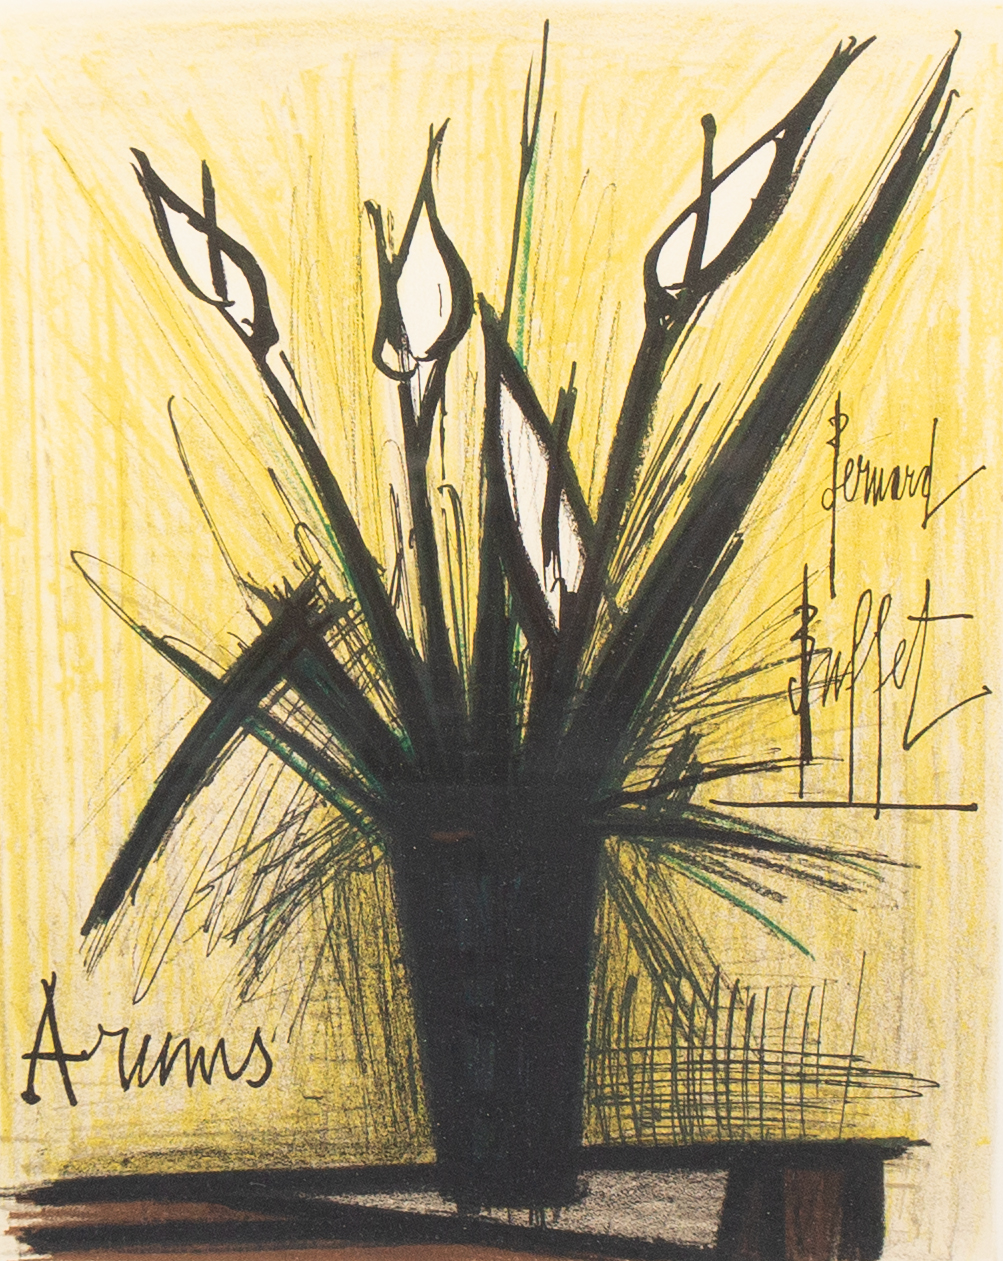 Bernard Buffet: a lithograph entitled 'Arums', published in the 1960s, from an edition of 200.